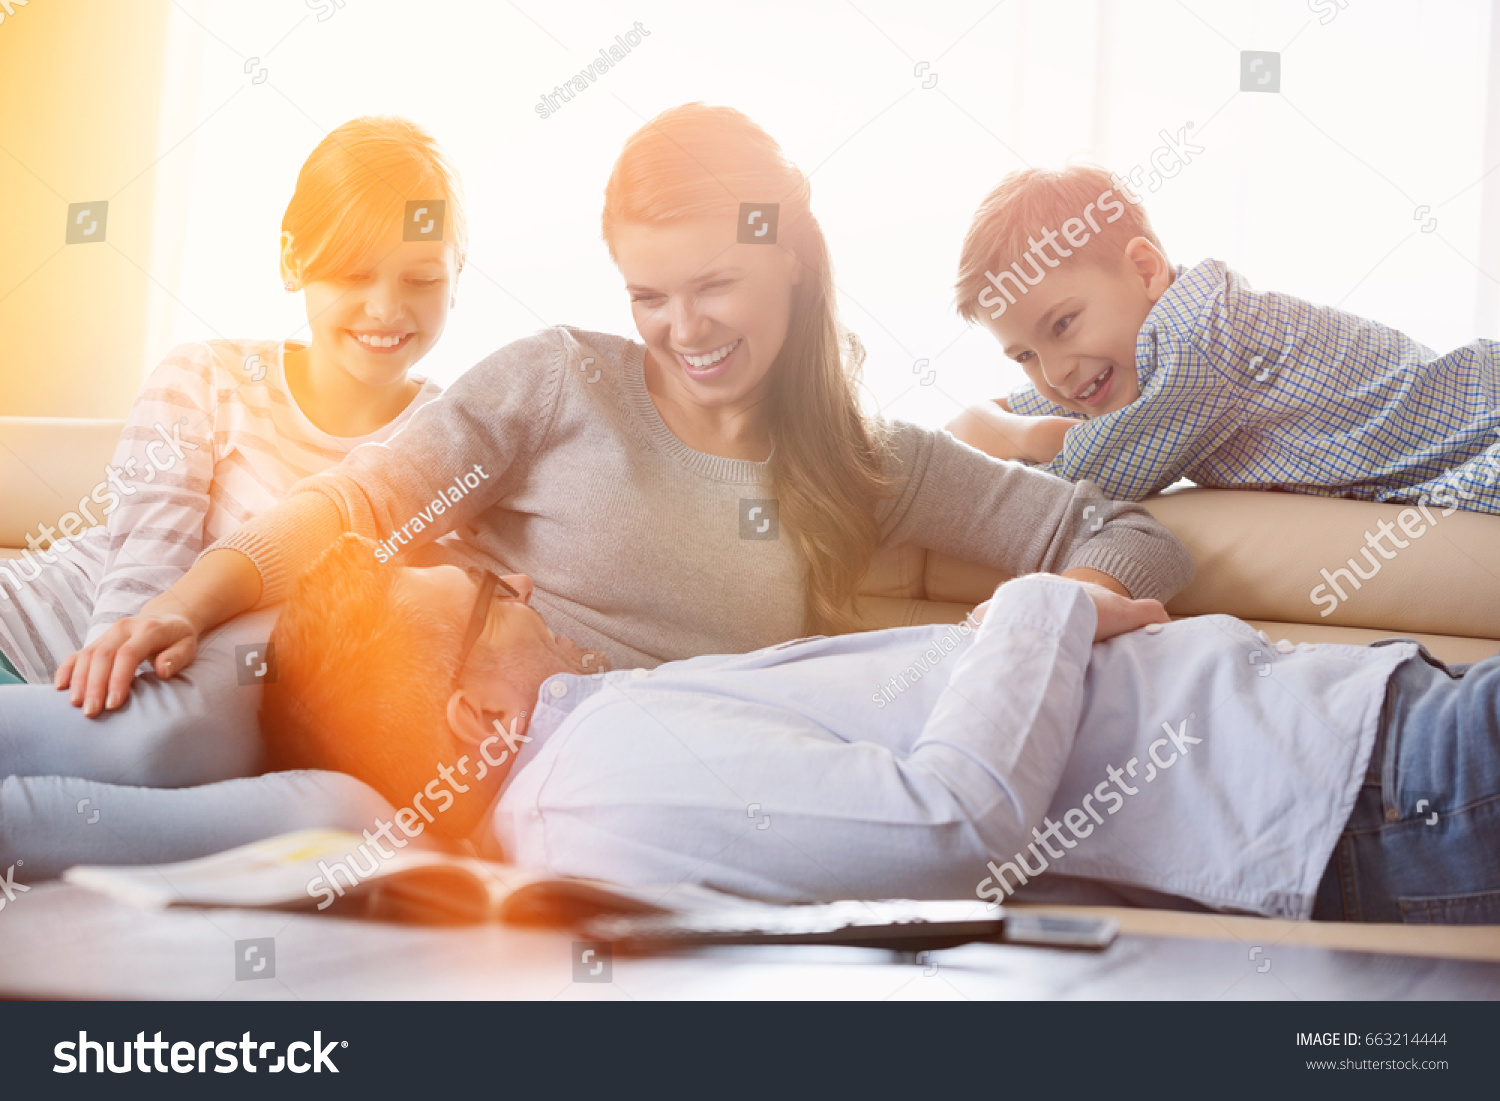 Happy family in living room #663214444